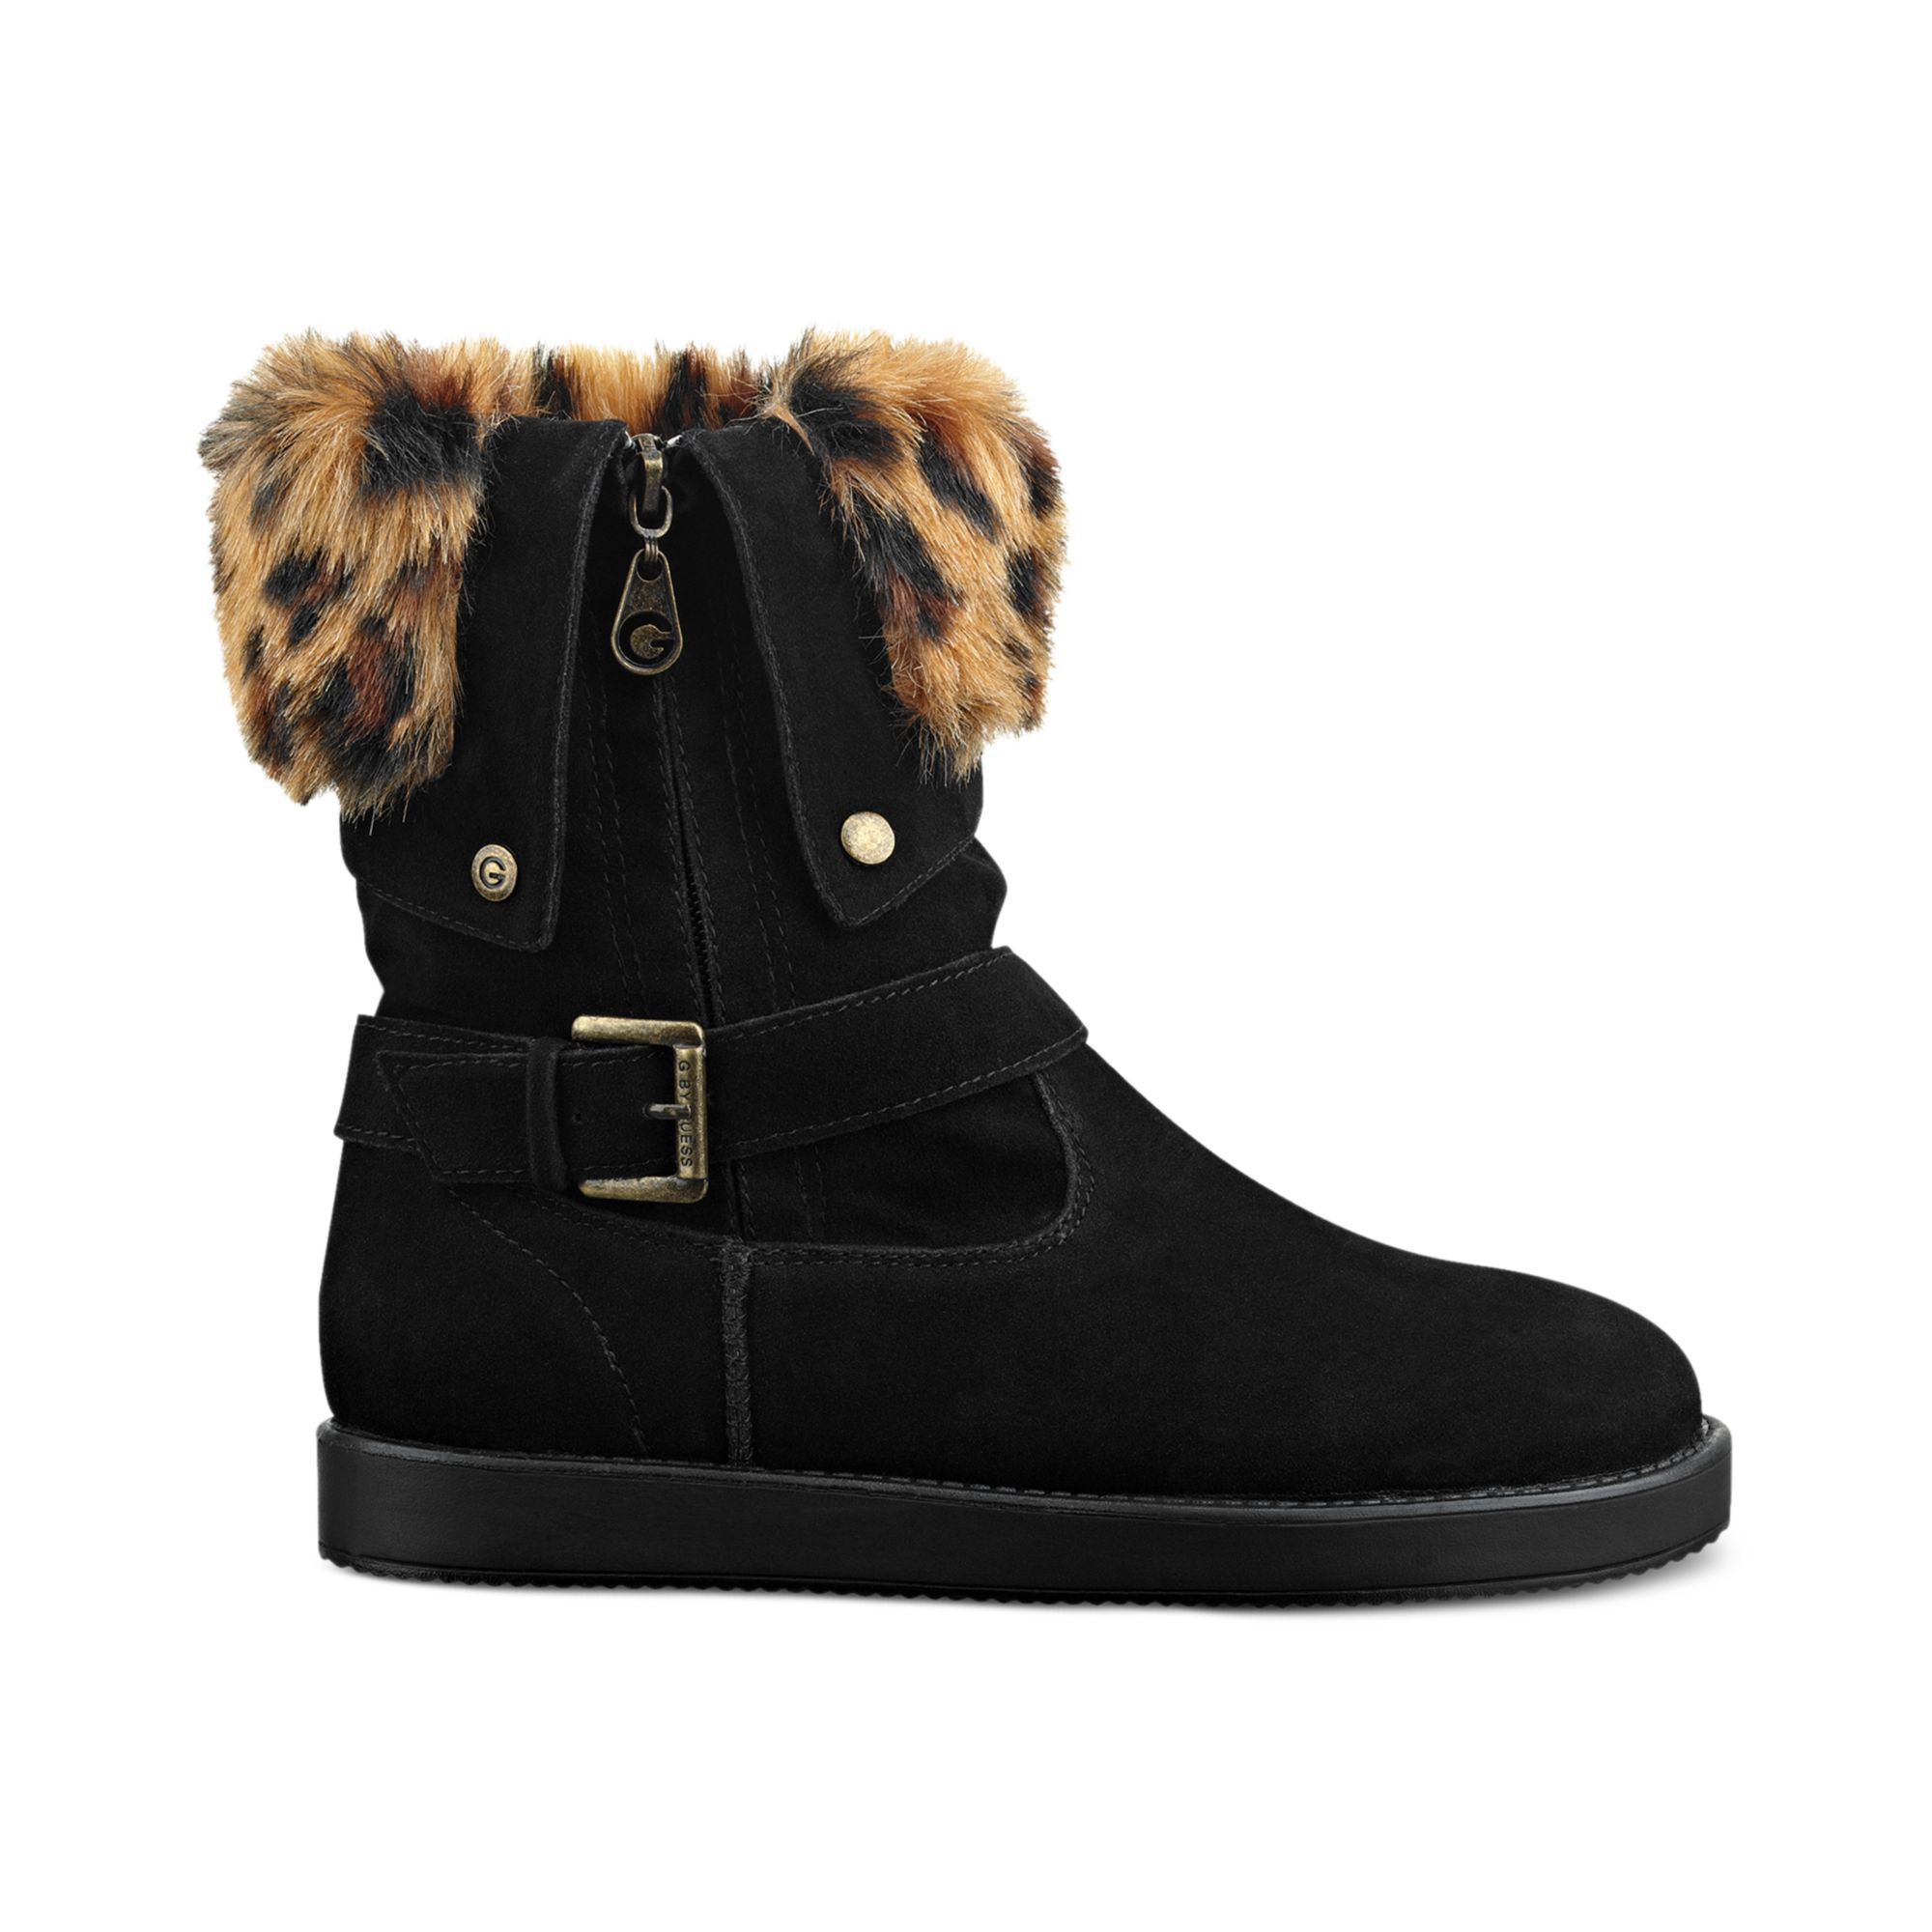 Lyst - G By Guess Womens Boots Amaze Fauxfur Cold Weather Booties in Black